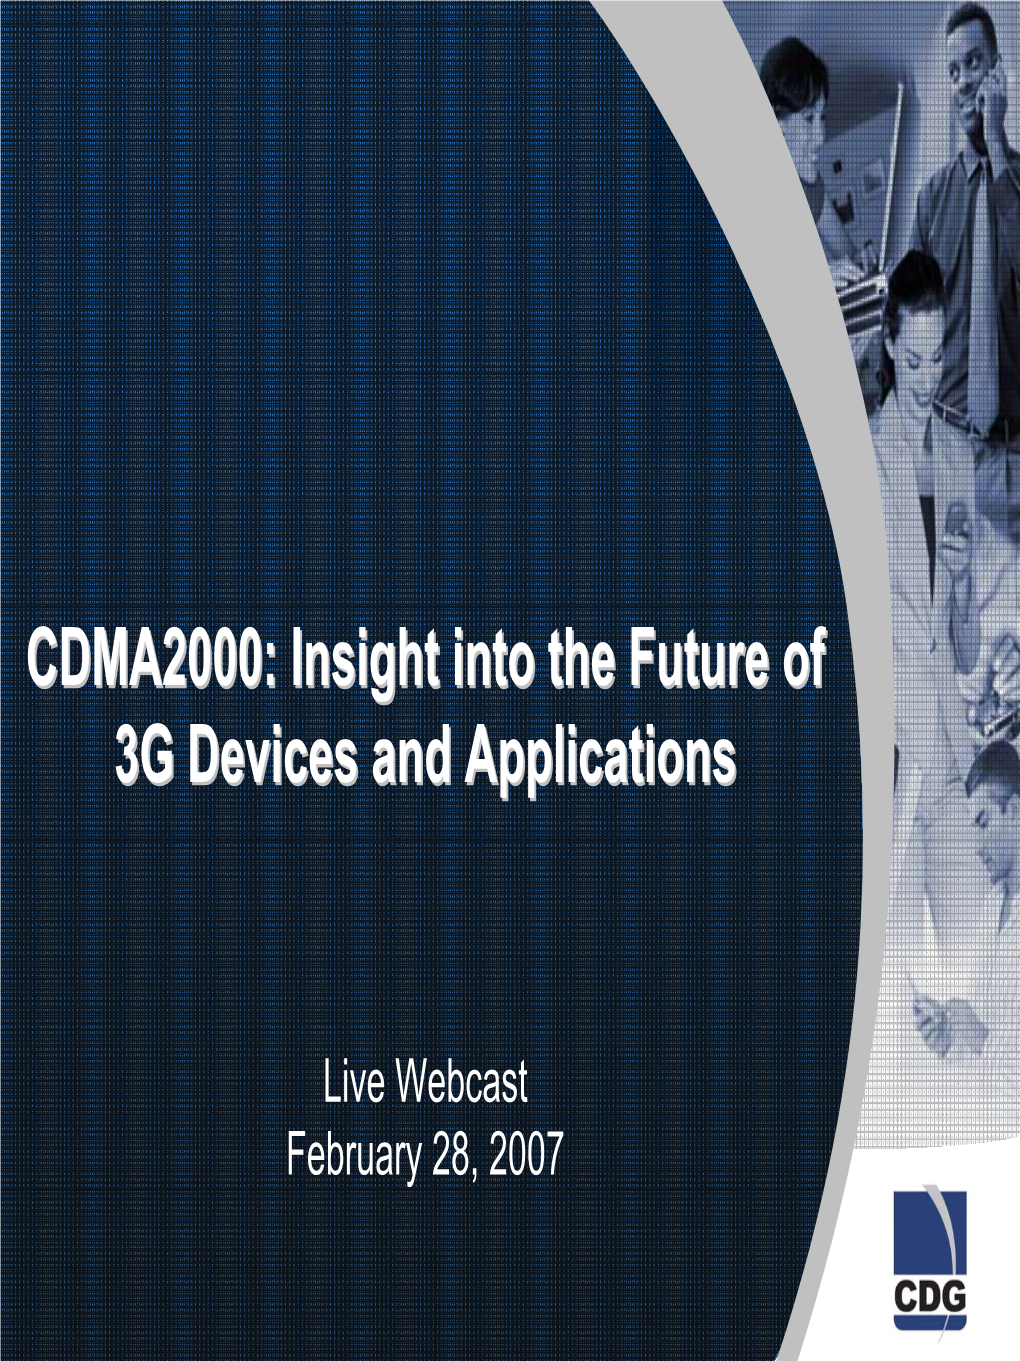 CDMA2000: Insight Into the Future of 3G Devices and Applications